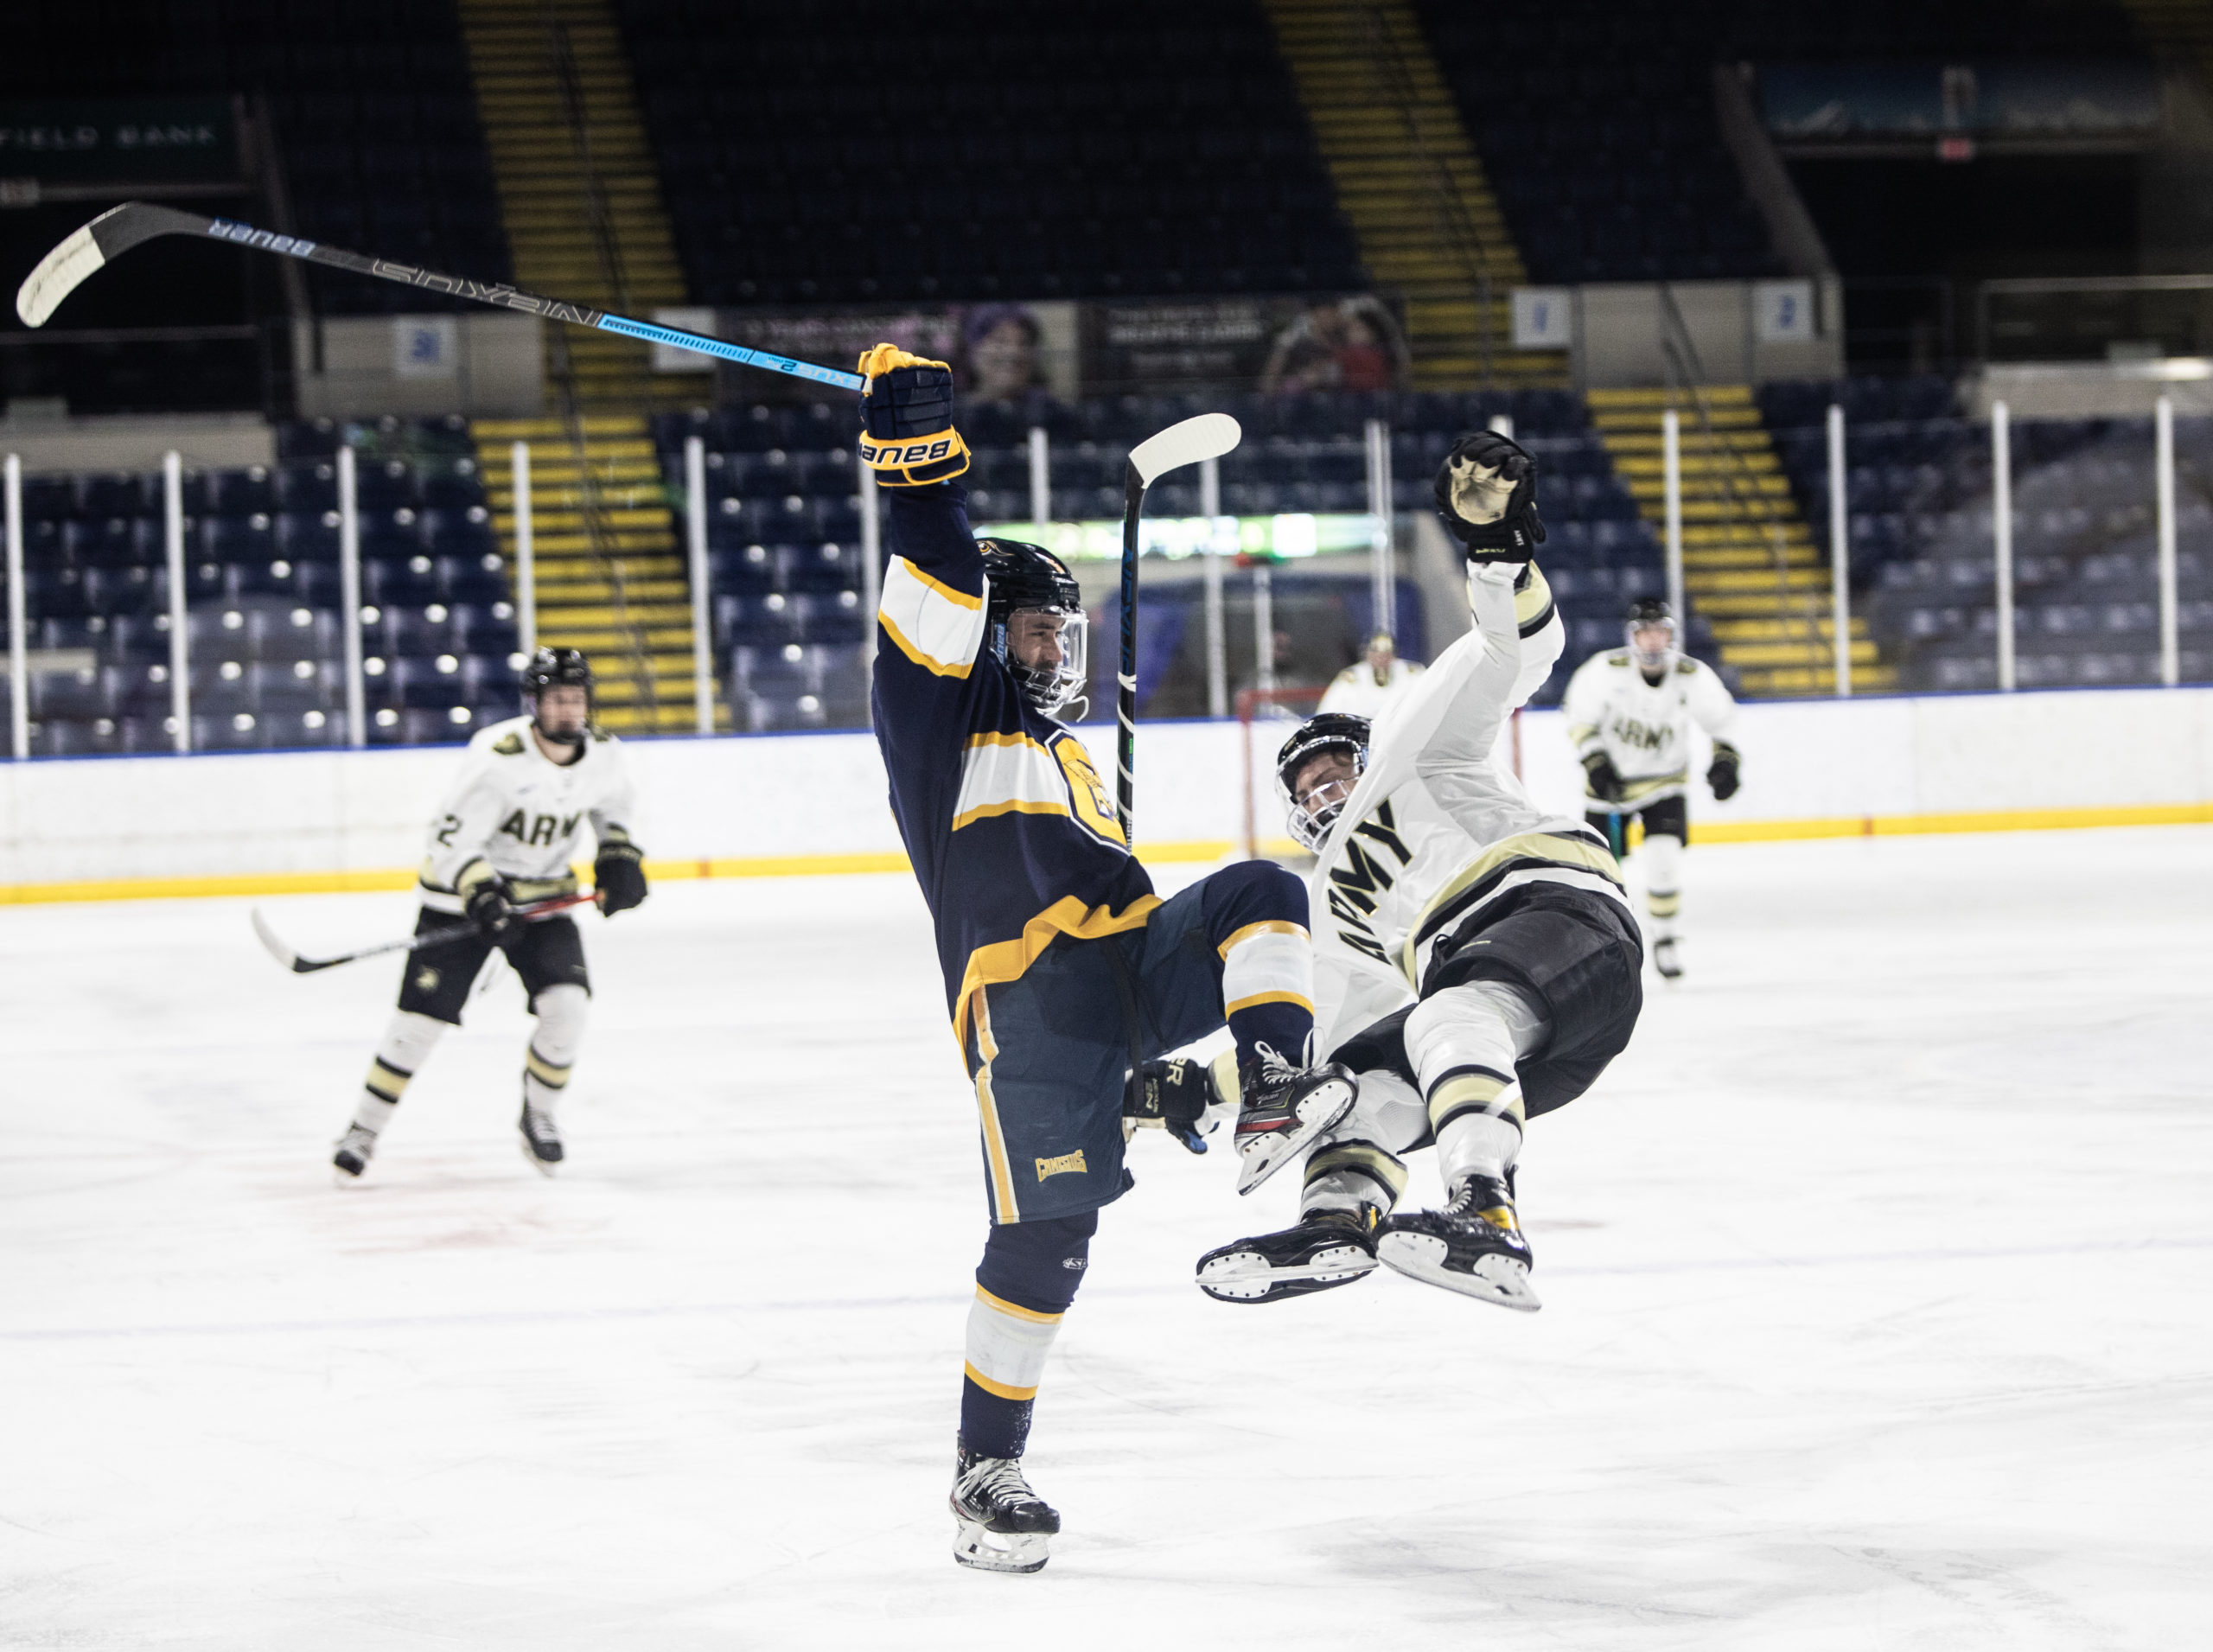 Canisius Knocks Out Army in Overtime